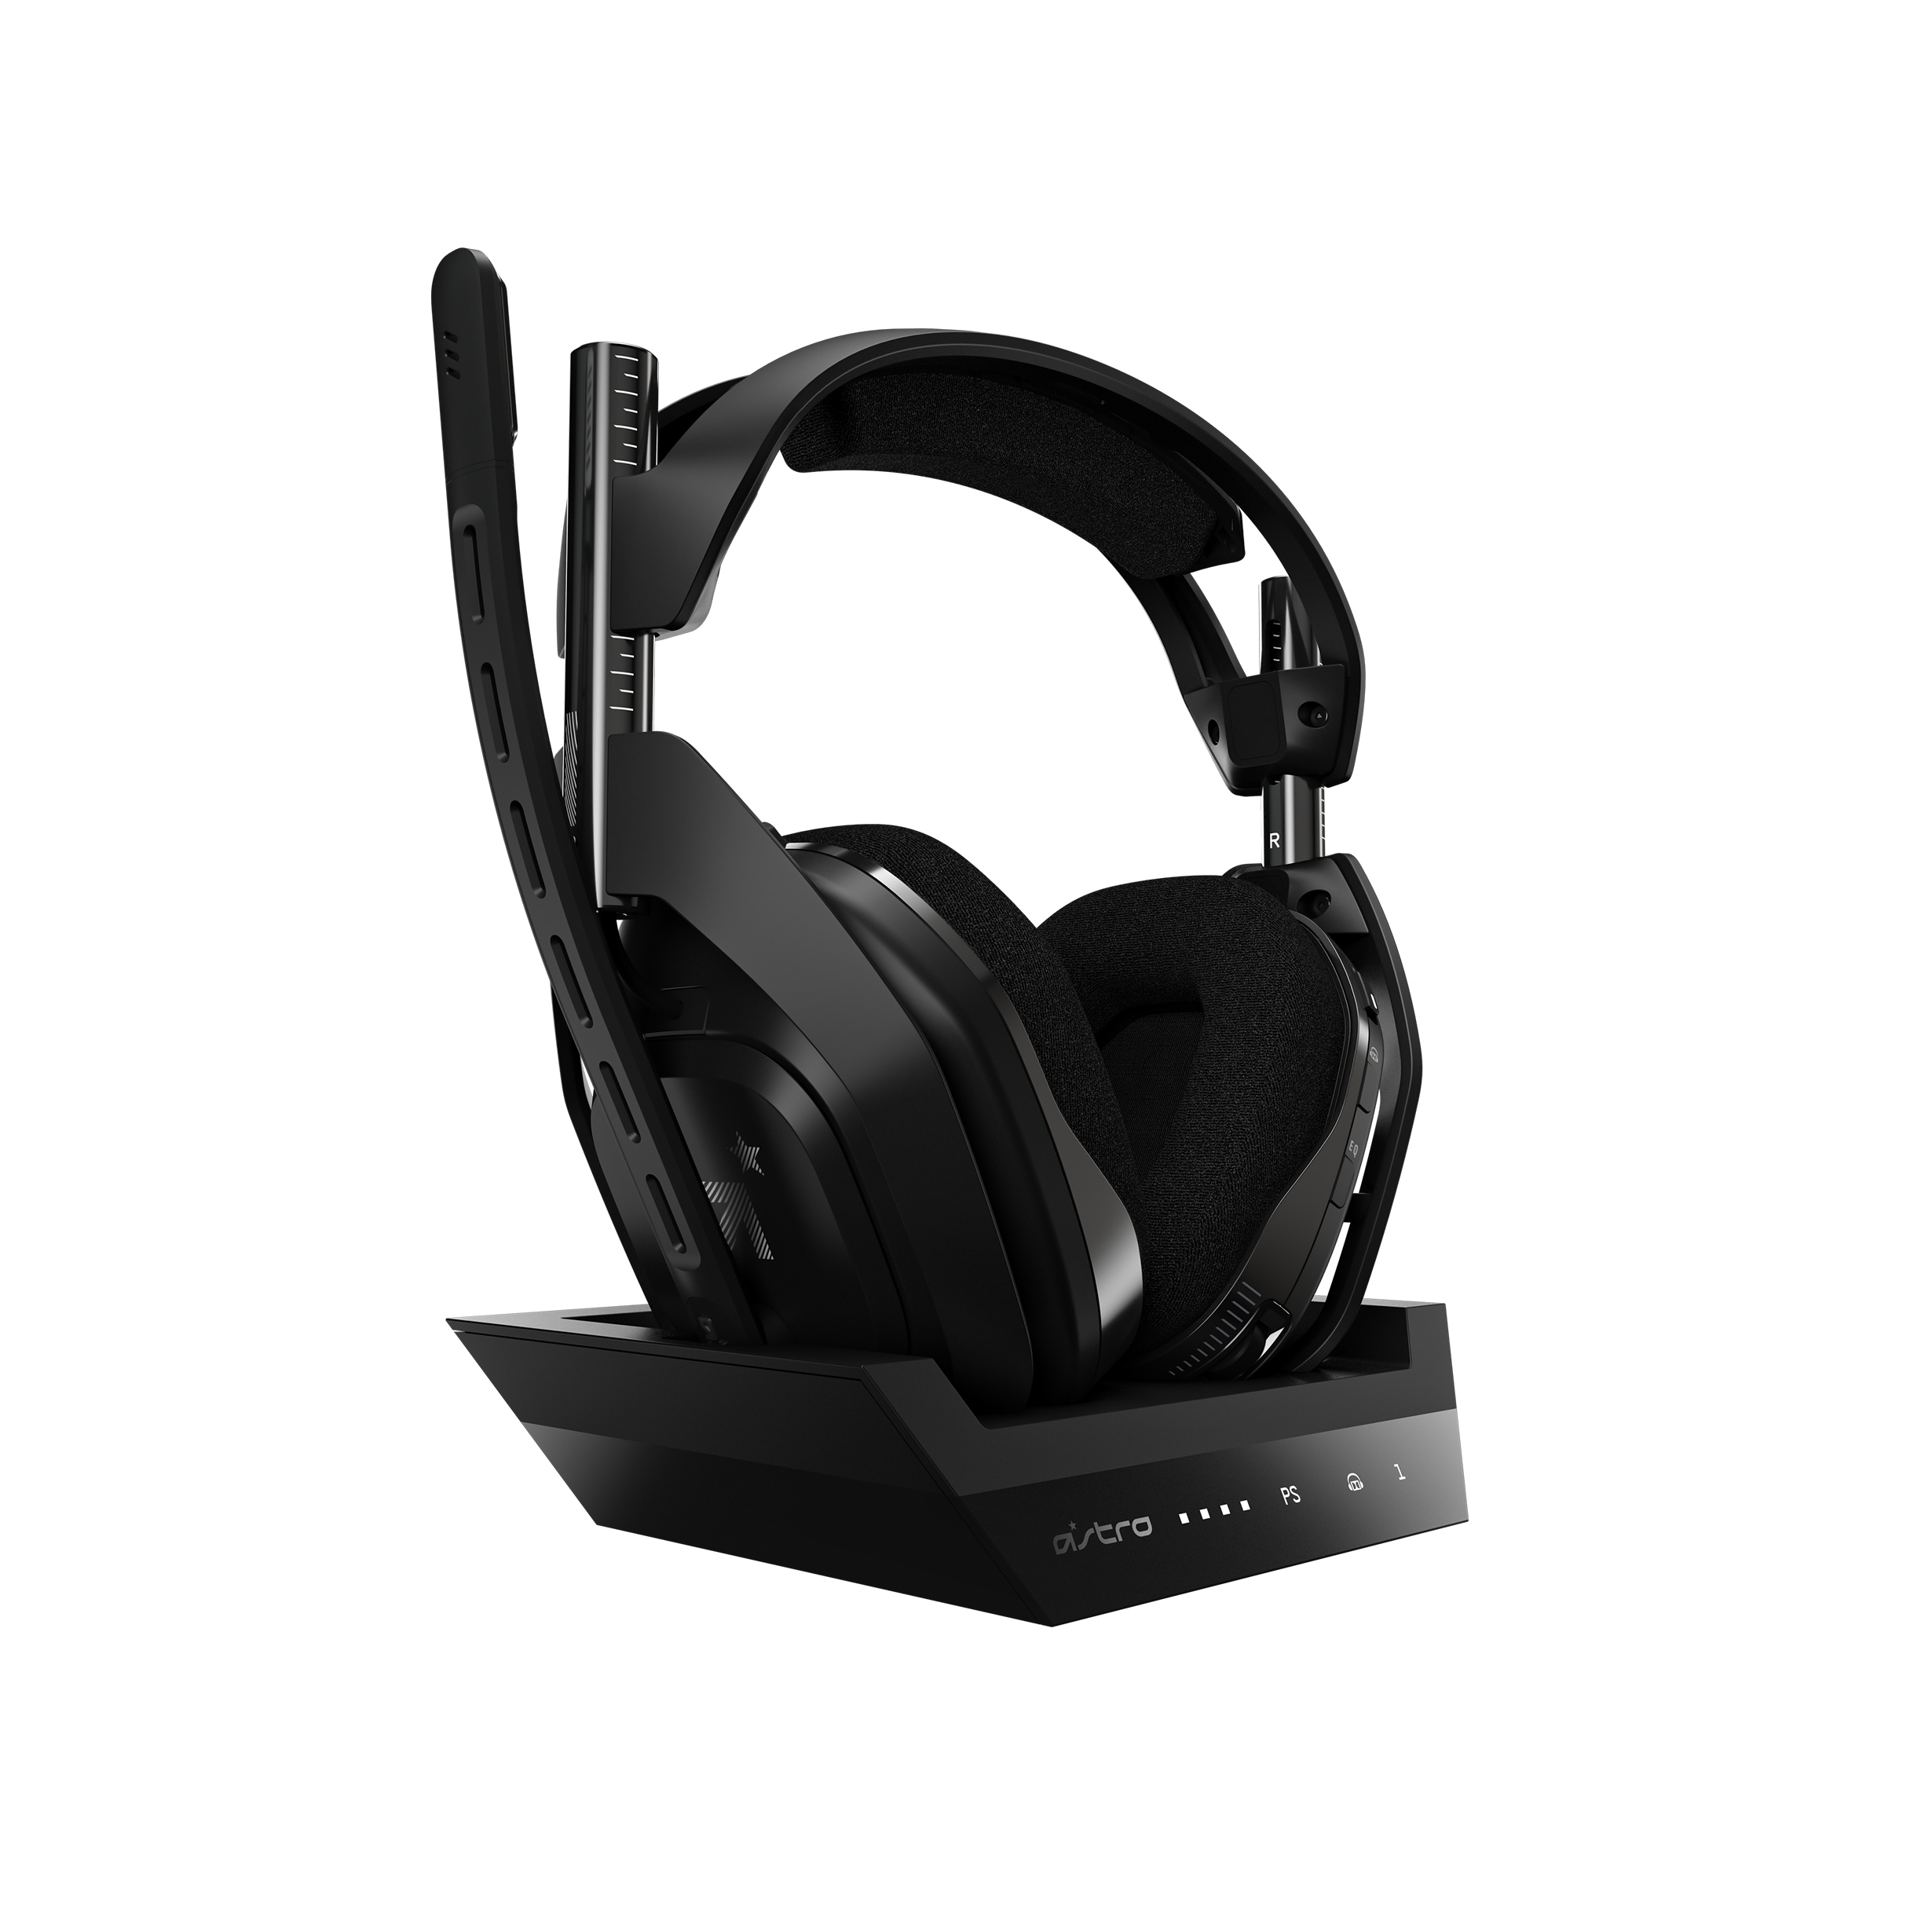 Logitech Astro A50 Wireless Gaming Headset and Base Station for PlayStation and PC/MAC